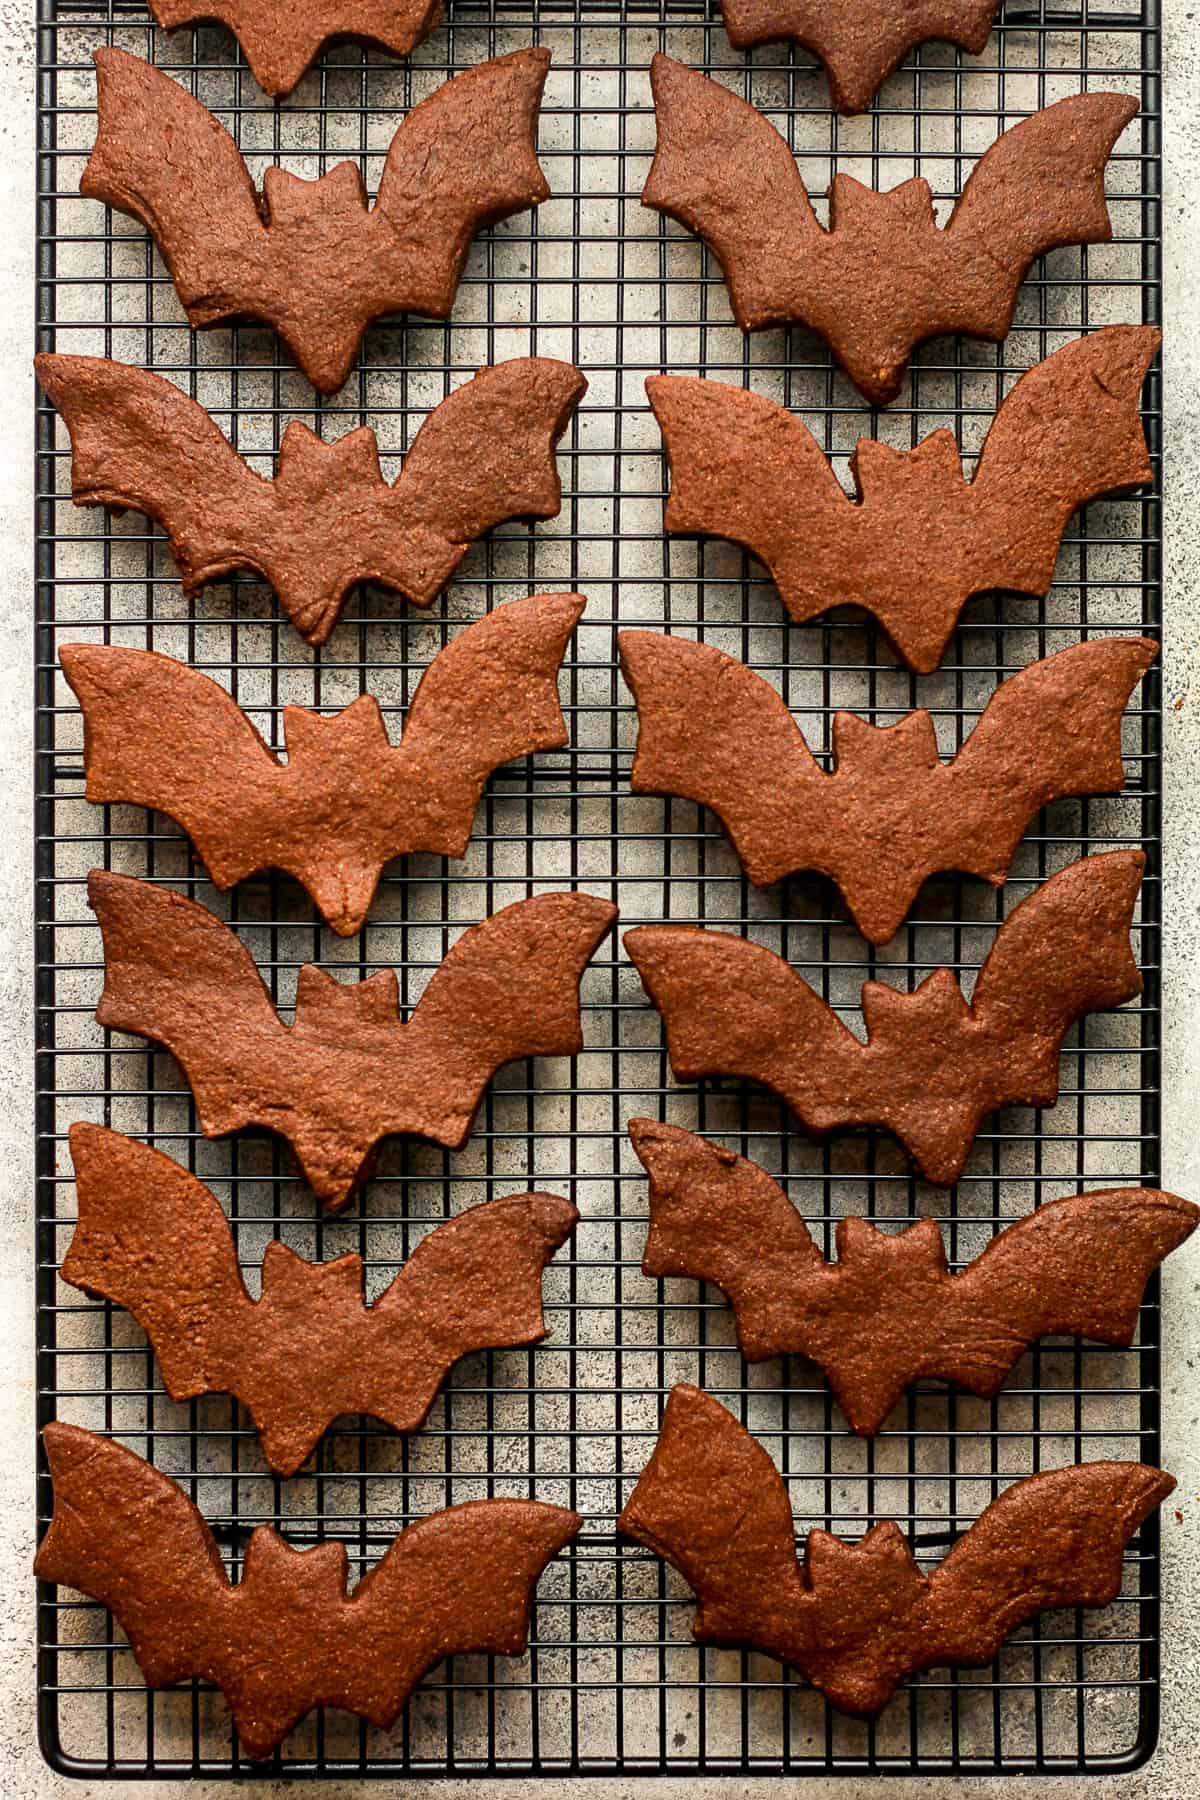 A wire rack with the bat cut-out cookies.